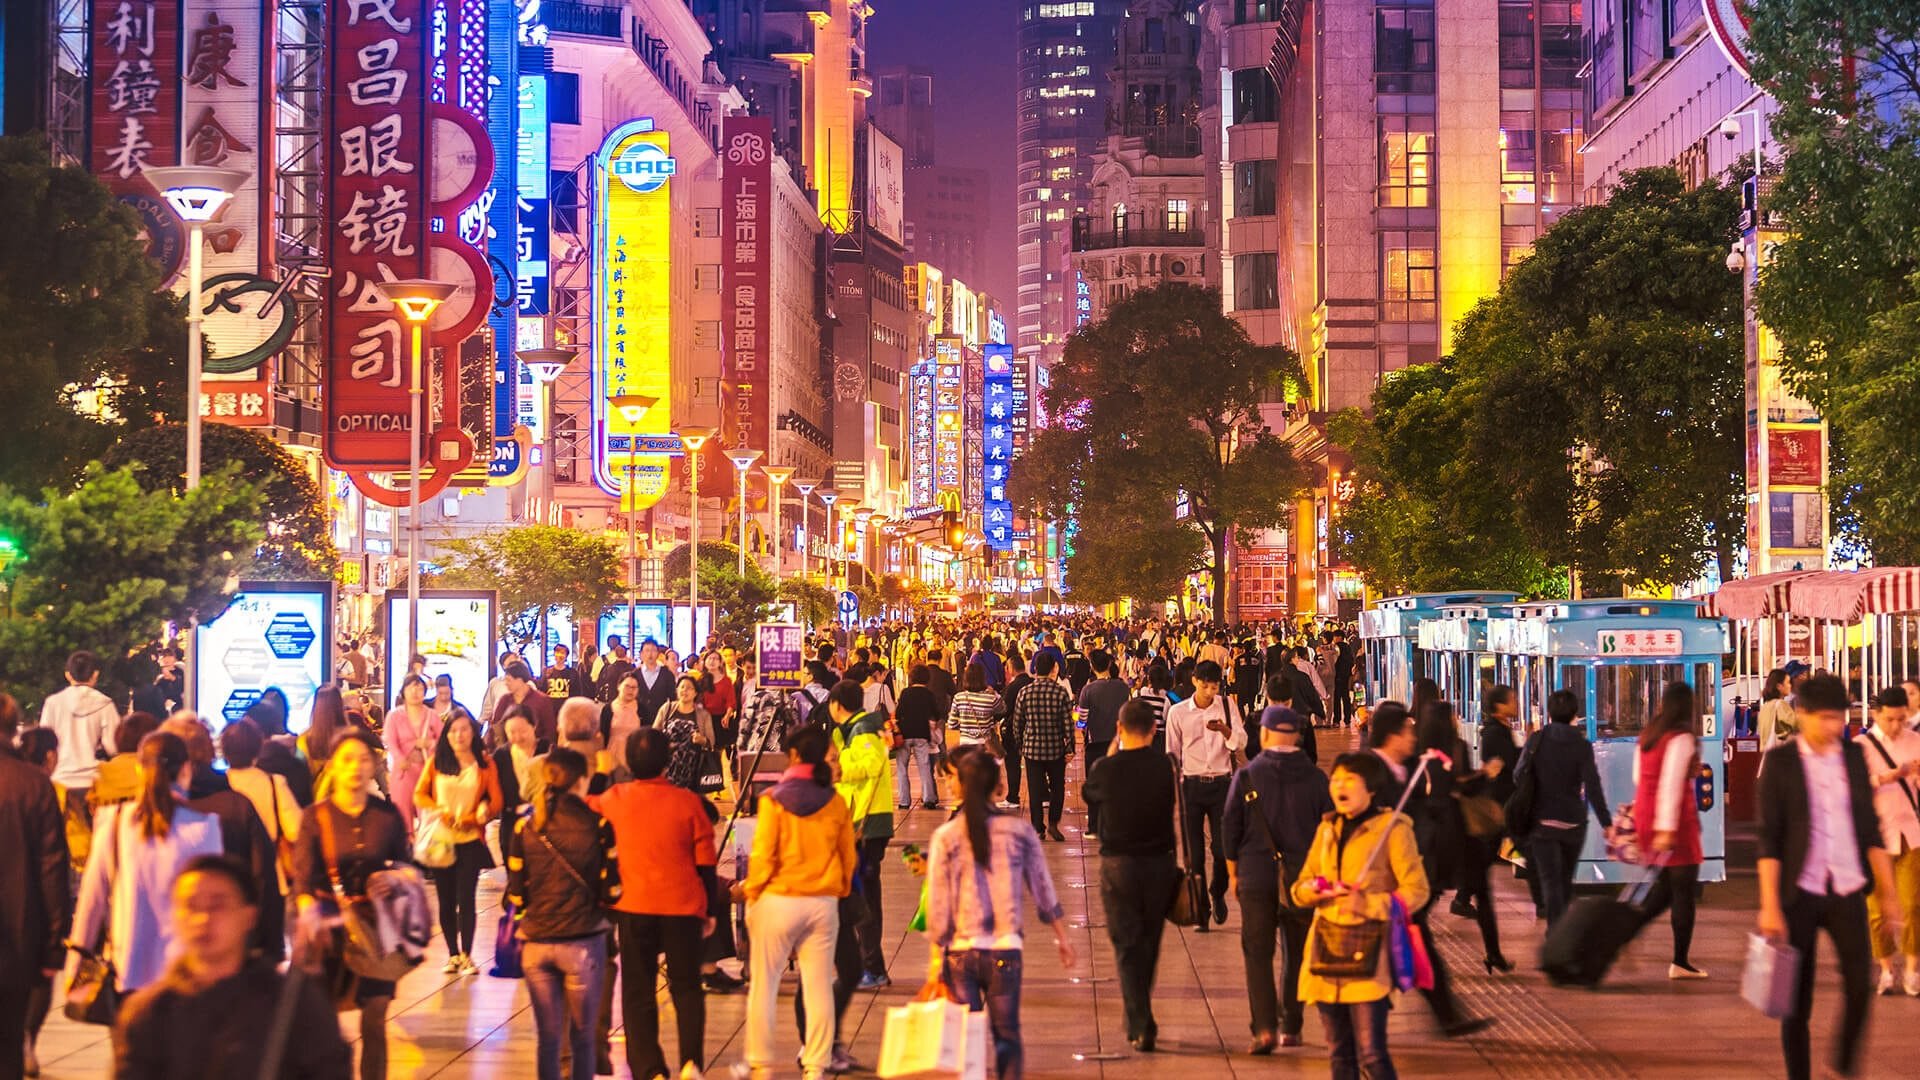 A street full of people in China at night